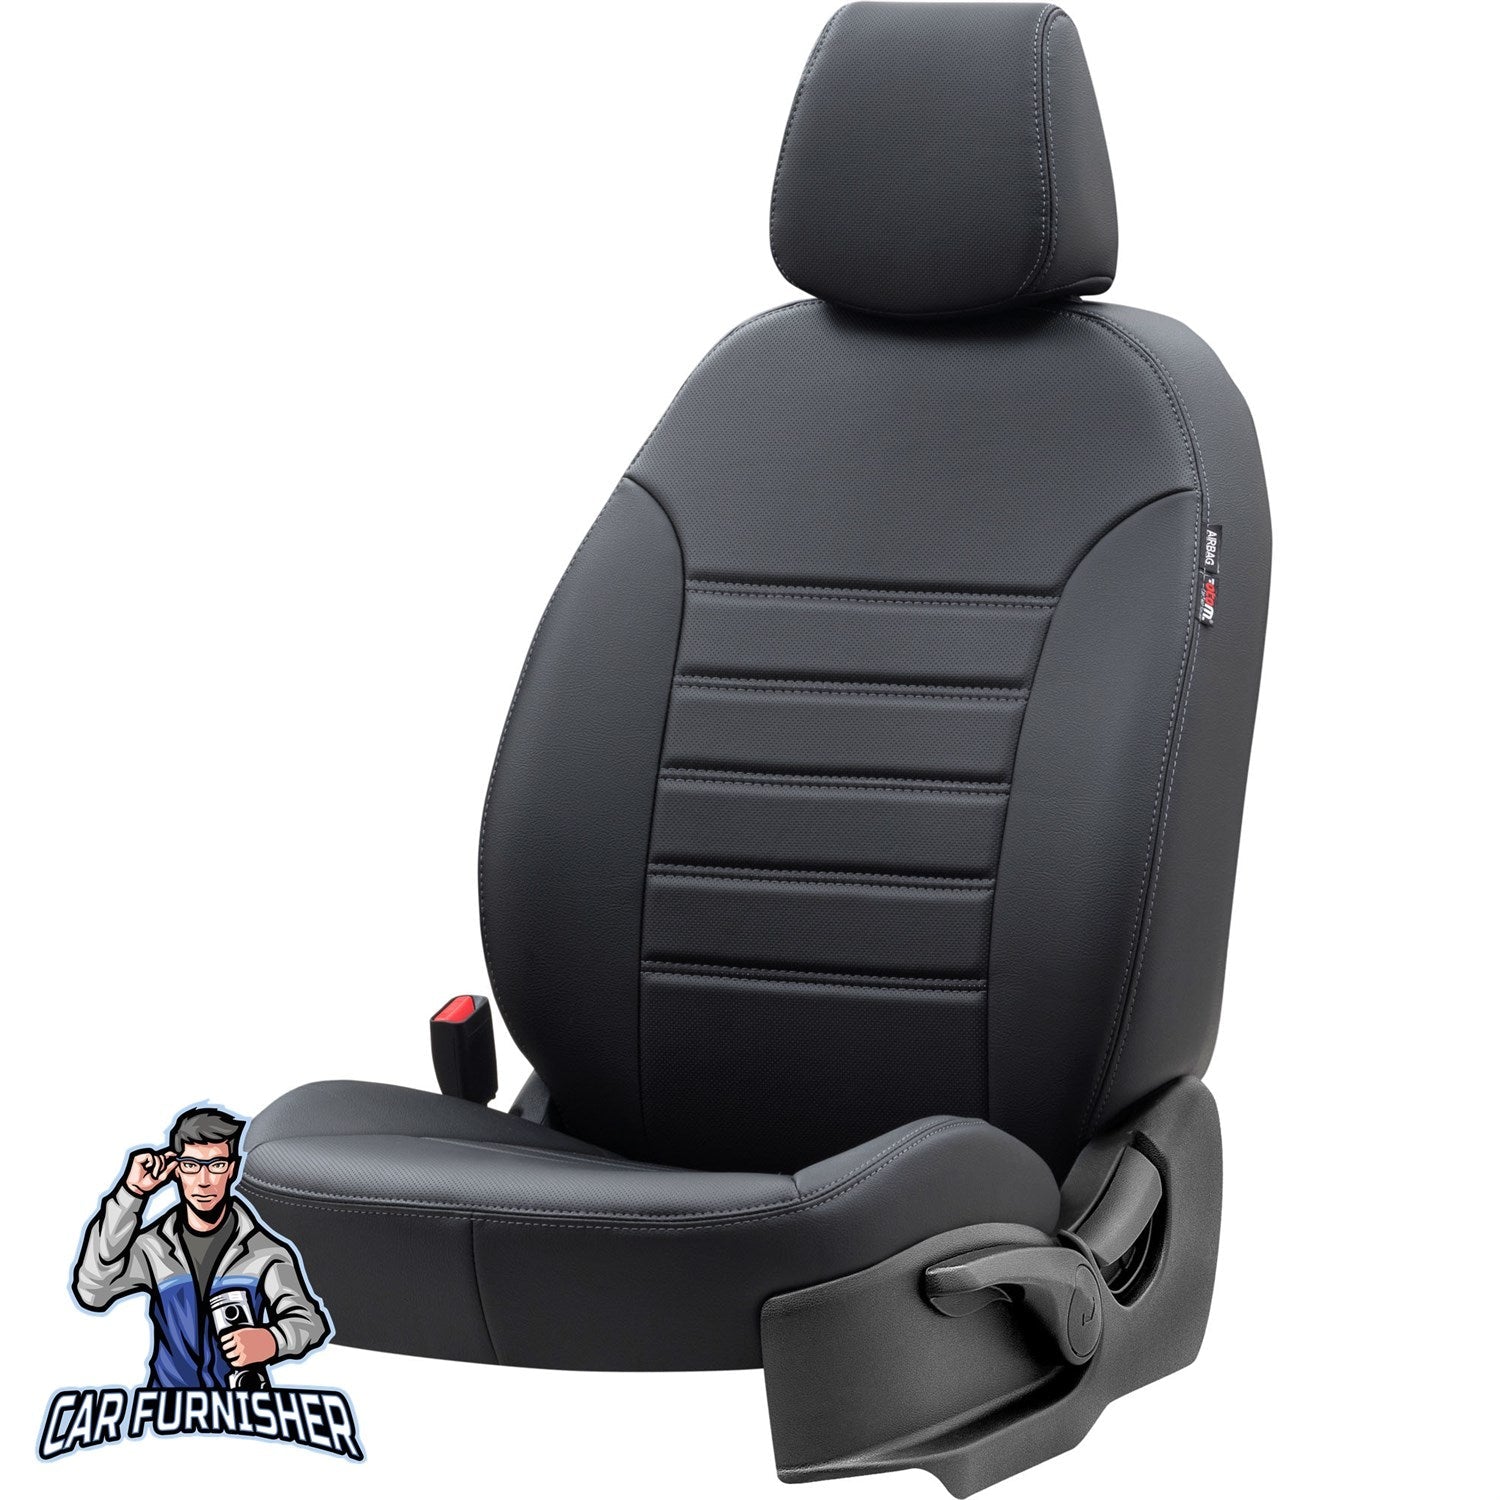 Toyota Corolla Seat Cover Istanbul Leather Design Black Leather